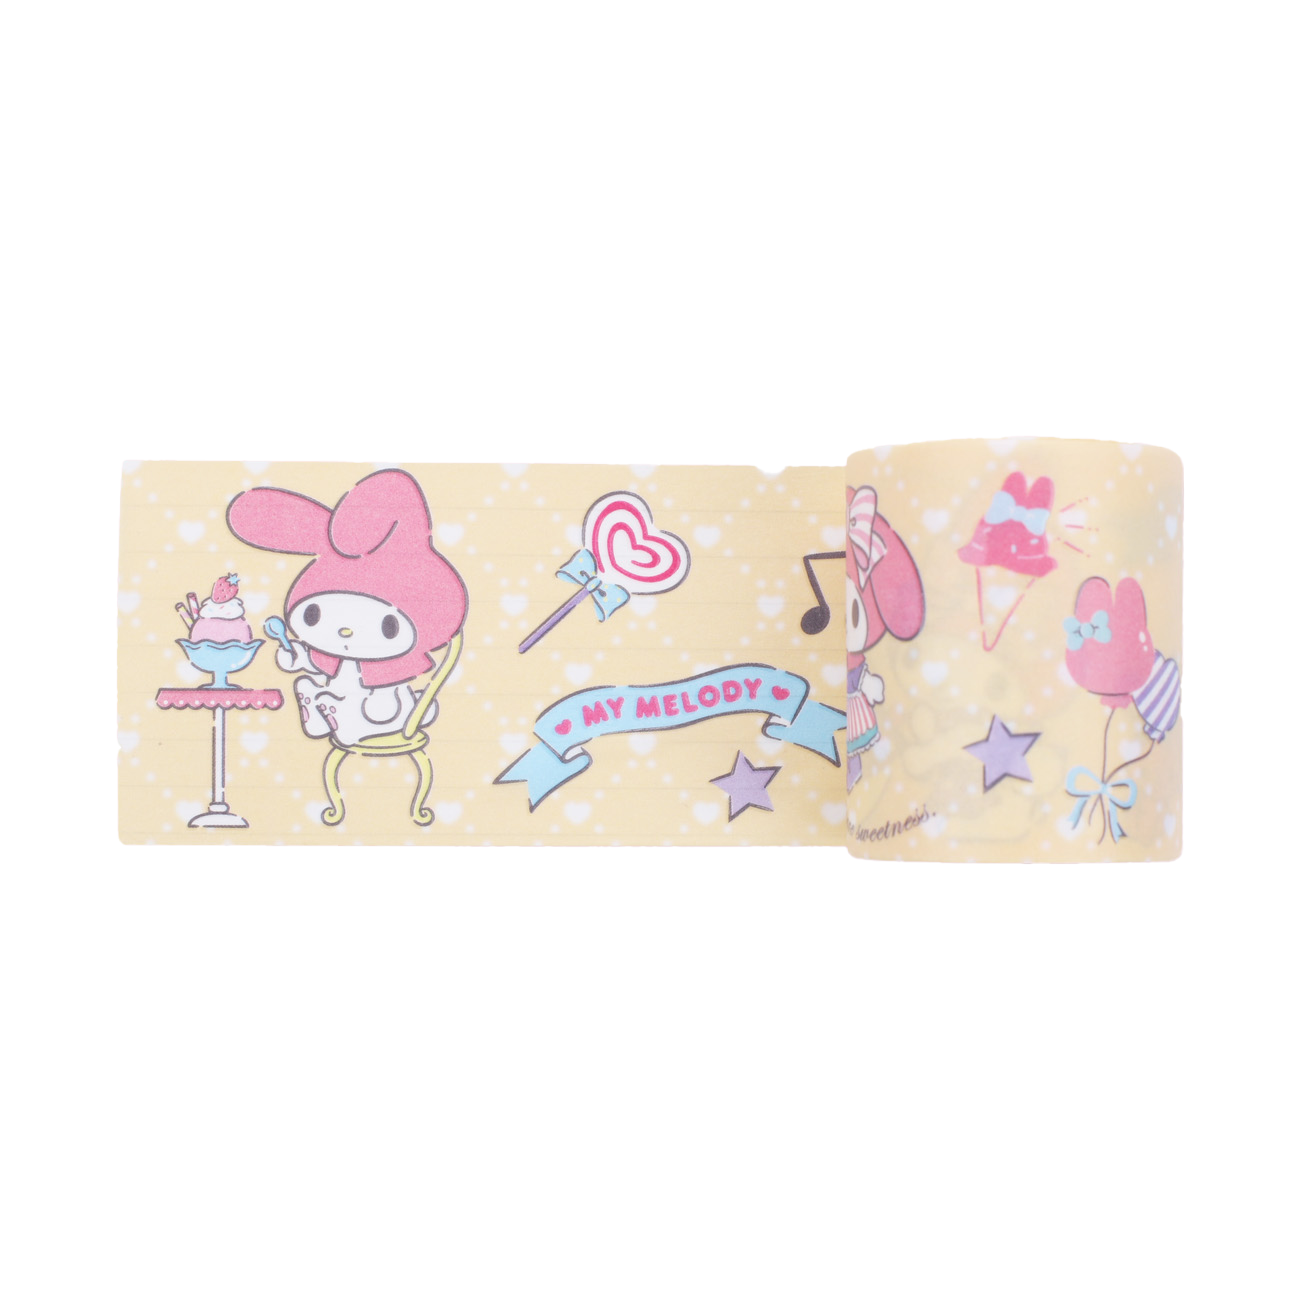 Sanrio Decorative Masking Tape Stickers for Journal Craft - Good